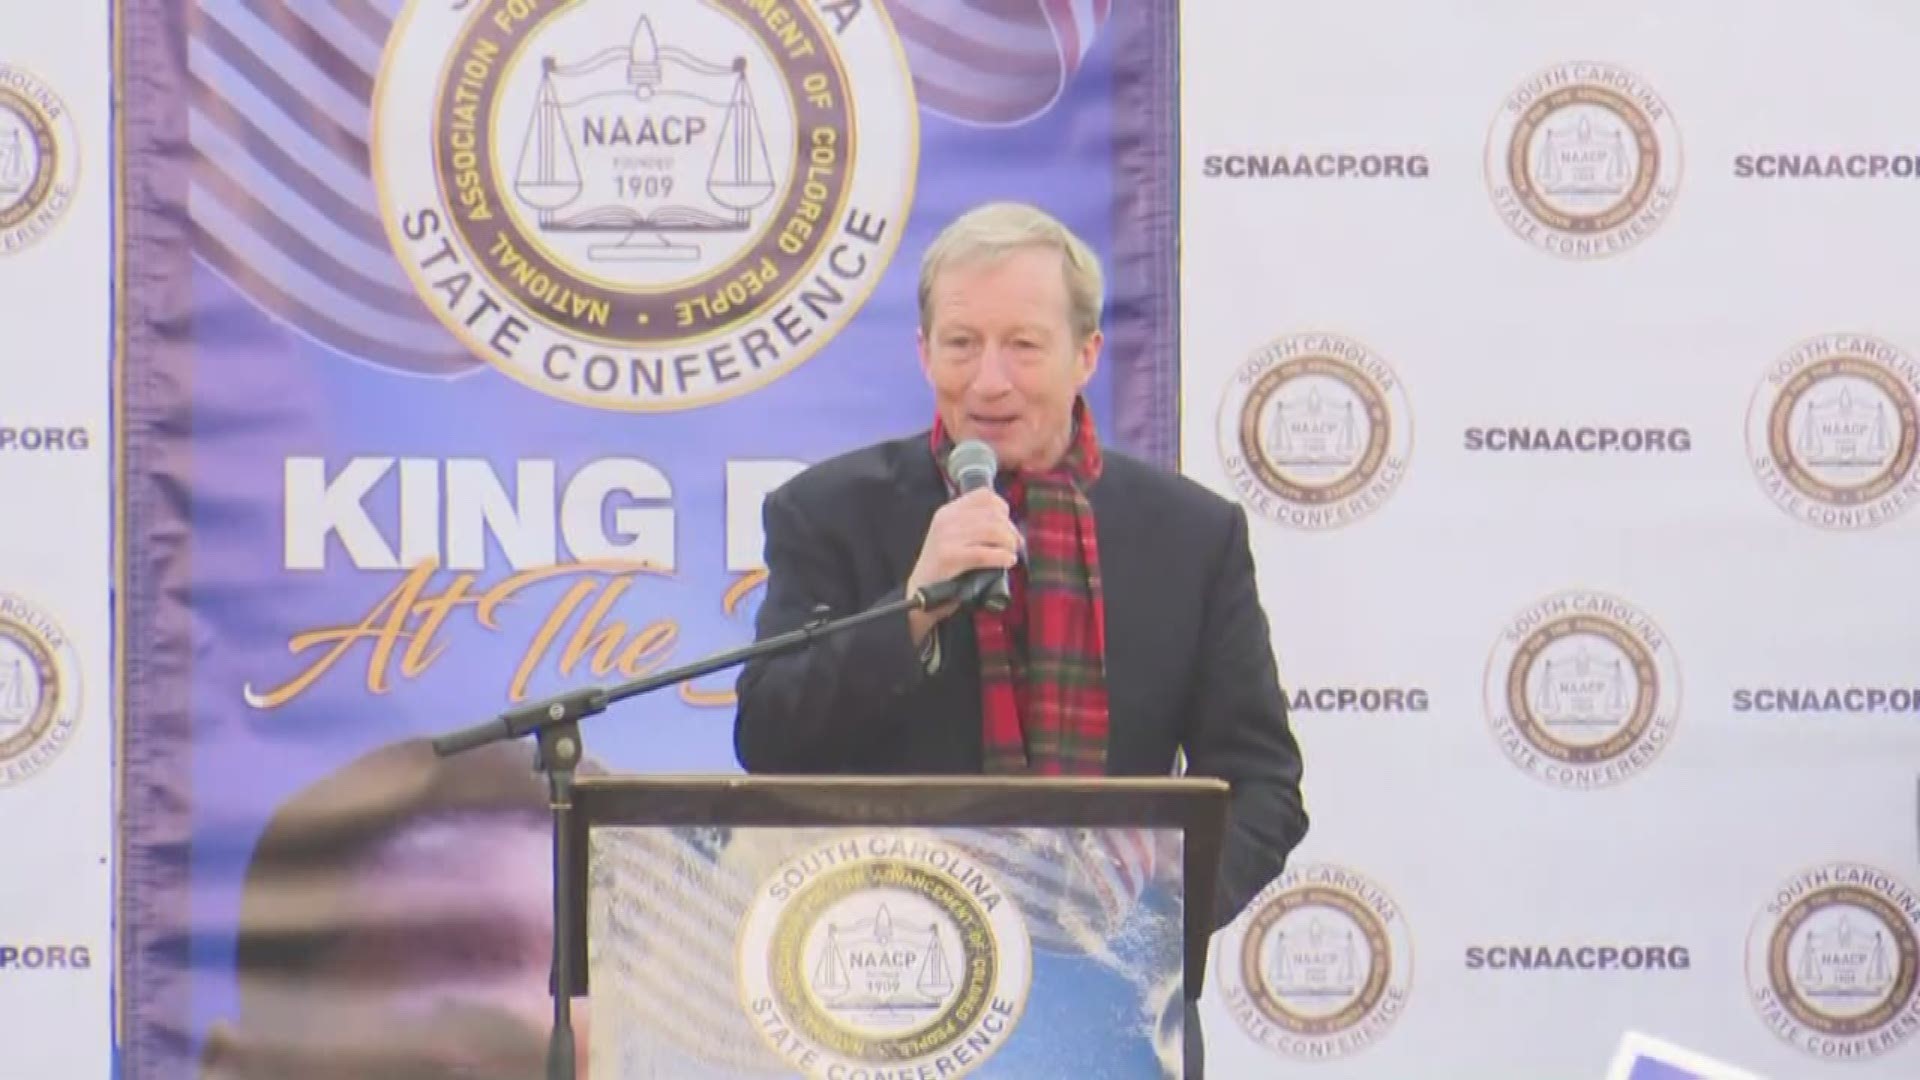 Billionaire businessman Tom Steyer spoke at the King Day at the Dome rally in ?Columbia, South Carolina on January 20, 2020.